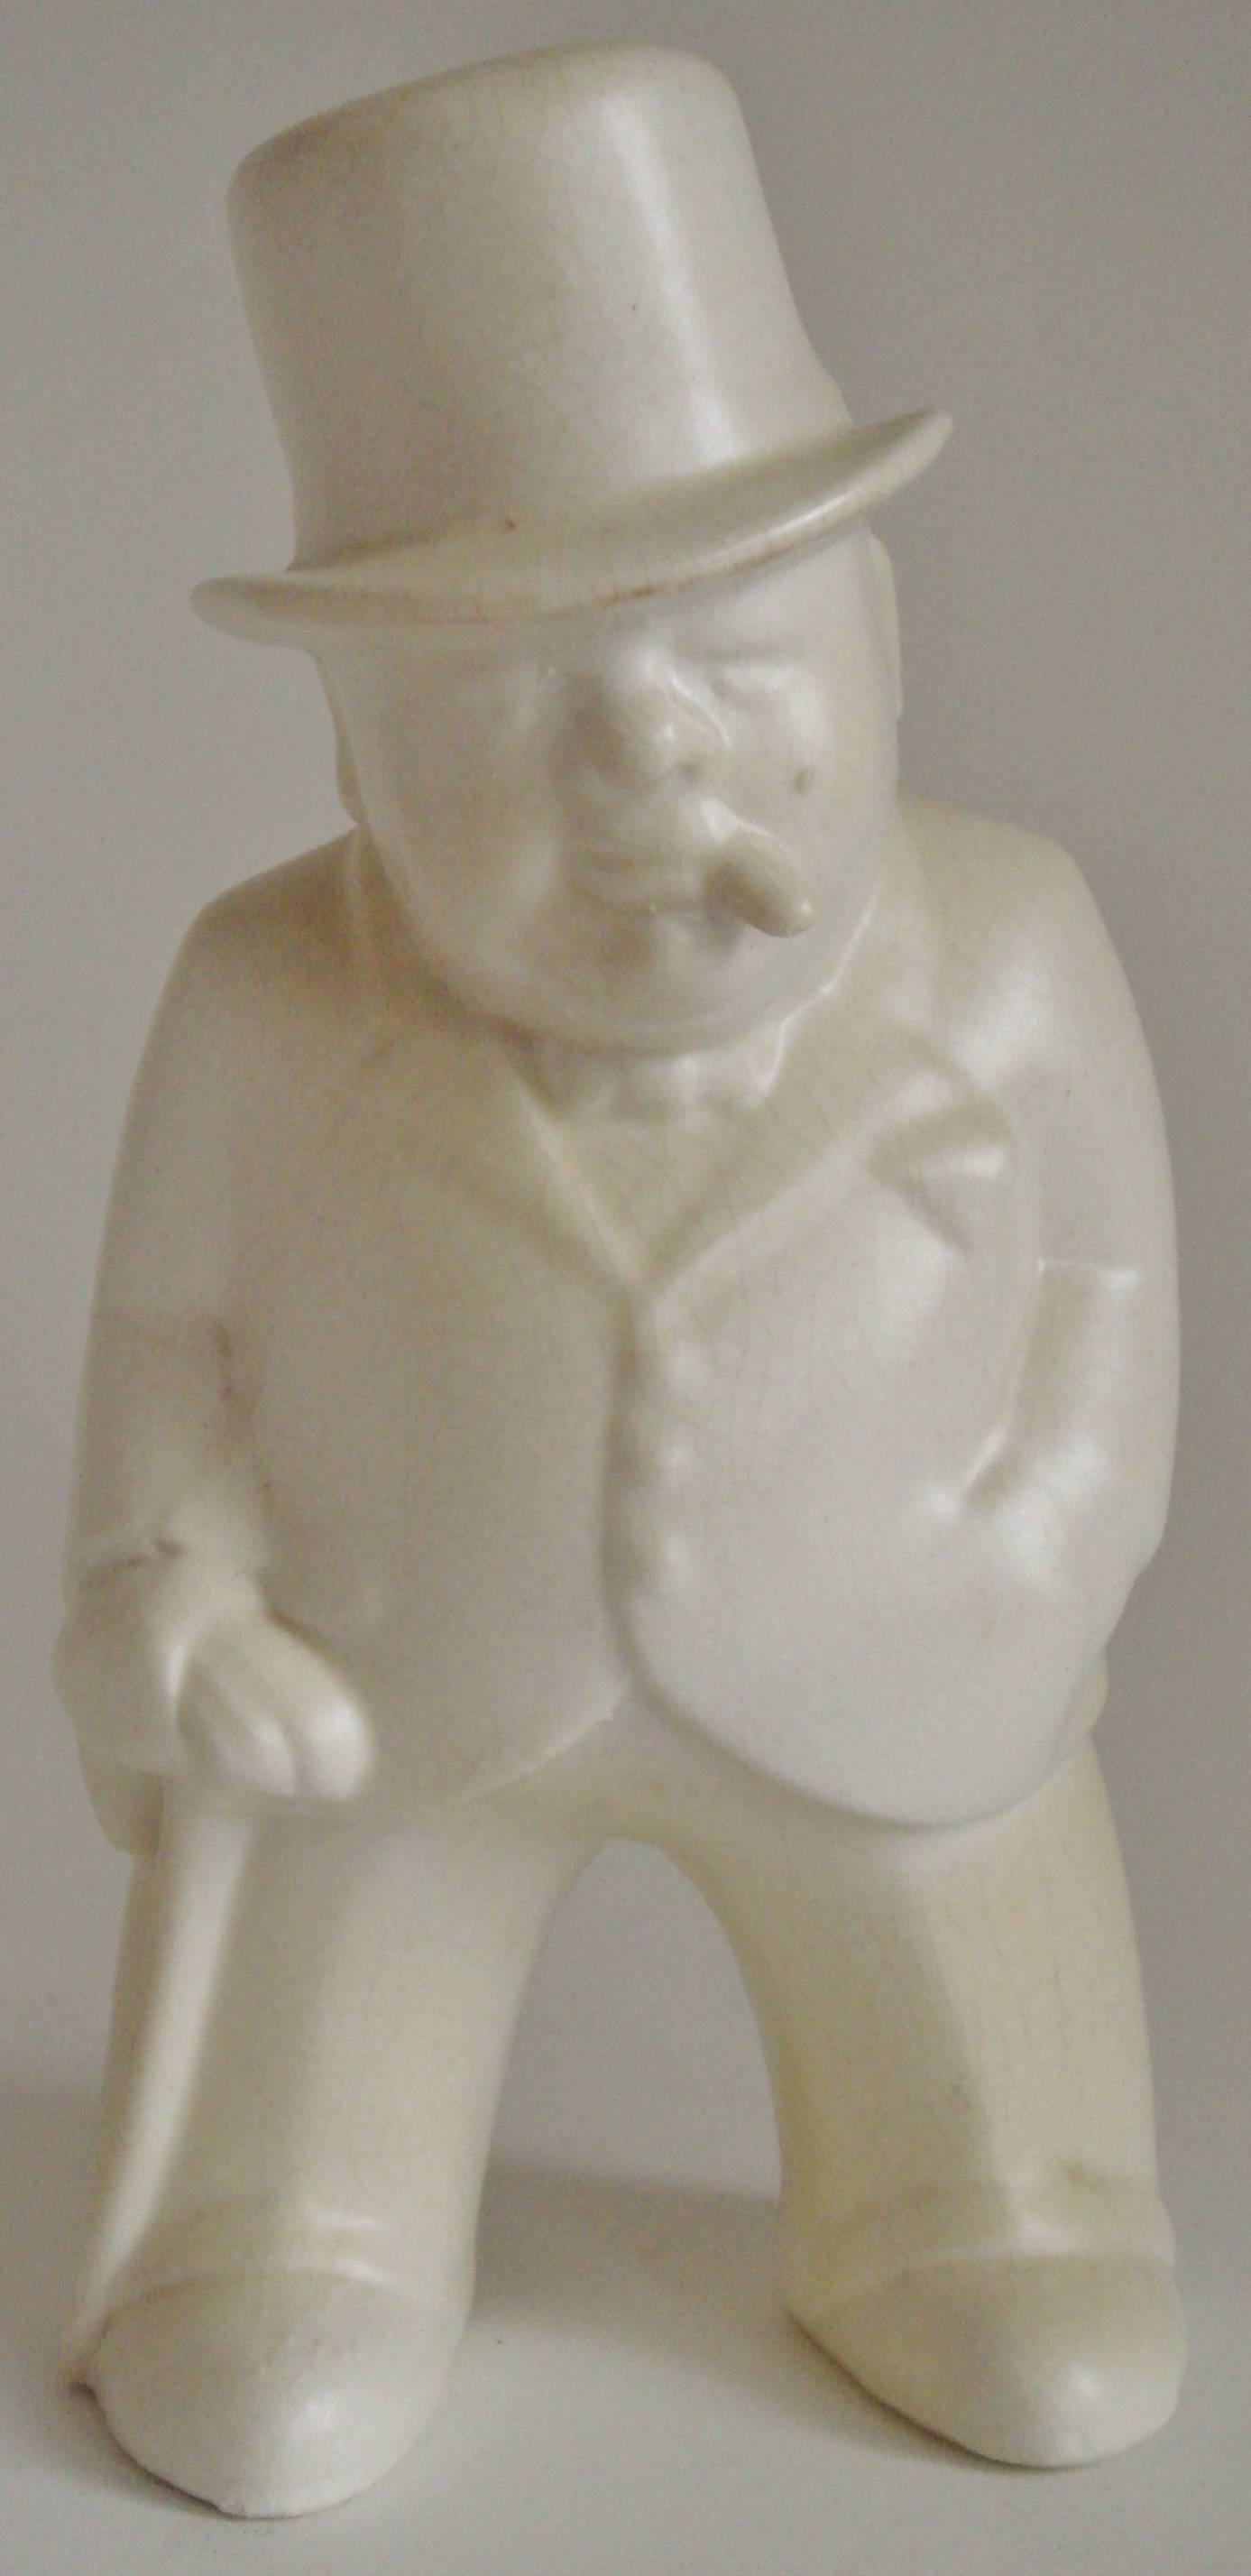 Mid-20th Century English Art Deco Ceramic Winston Churchill, Our Gang Figure by the Bovey Pottery